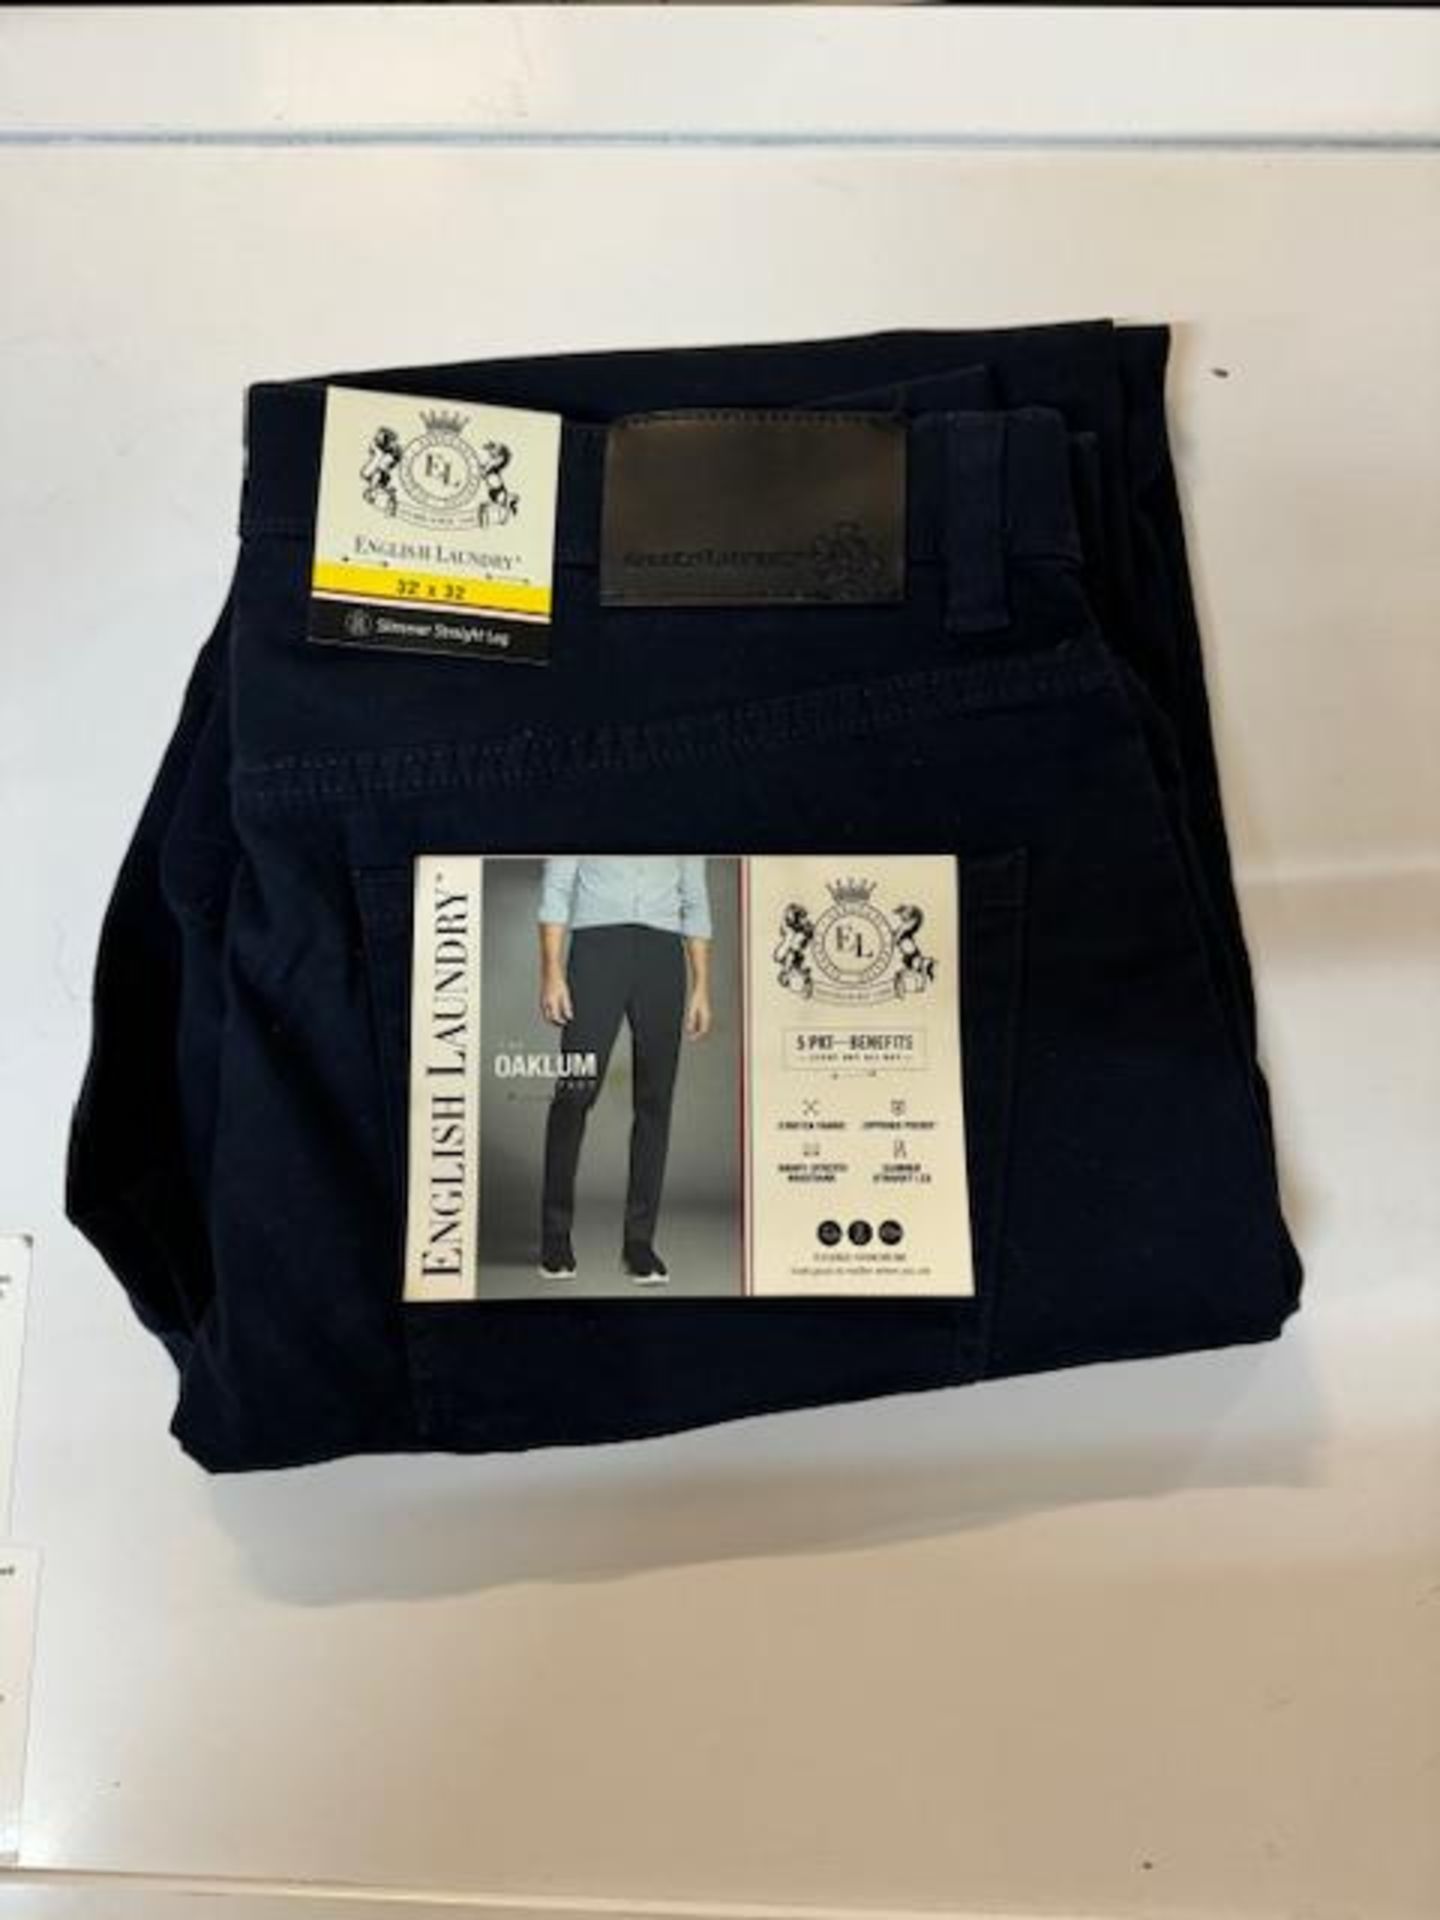 1 BRAND NEW ENGLISH LAUNDRY MIDWAY PANT, TECH STRETCH FABRIC, NAVY SIZE 32 X 32 RRP Â£24.99